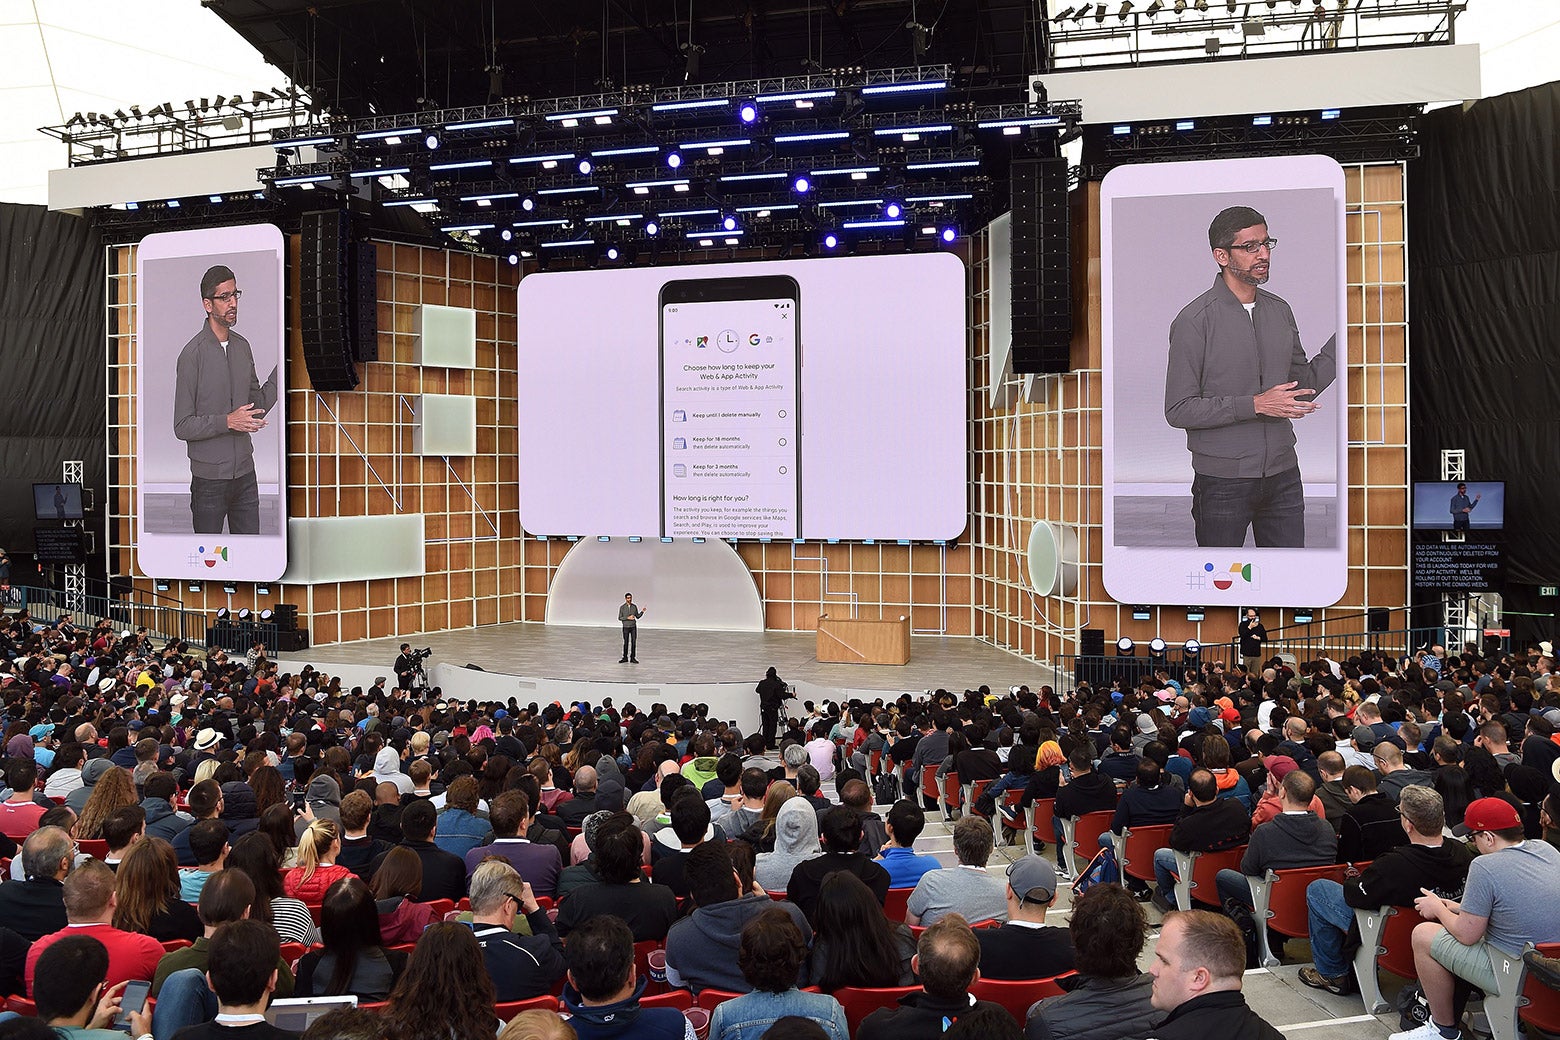 Sundar Pichai stands on a stage, flanked by images of himself on Android phones.